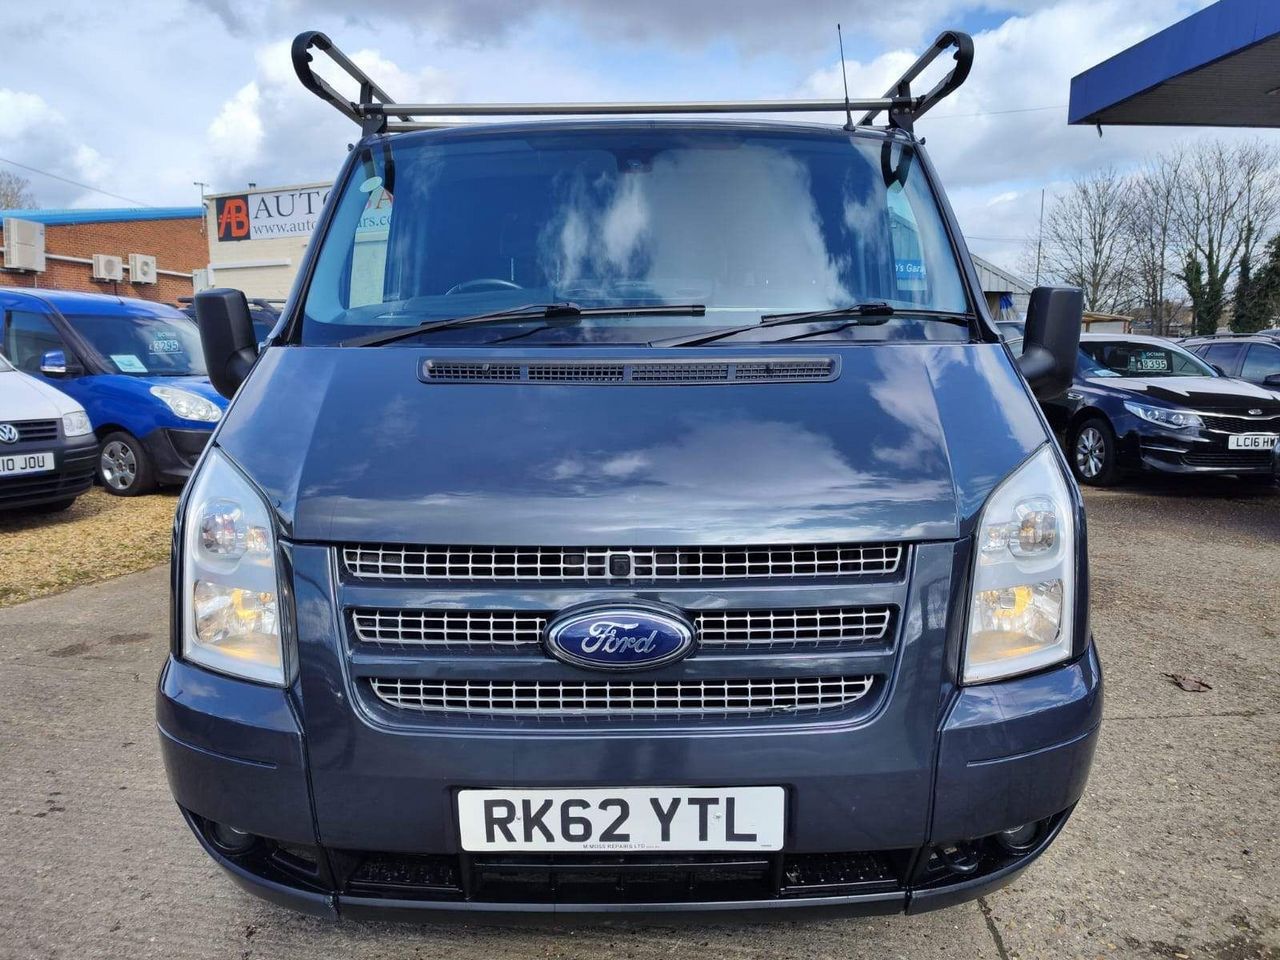 2012 Ford Transit 2.2 TDCi 280 Limited FWD L1 H1 5dr - Picture 3 of 34